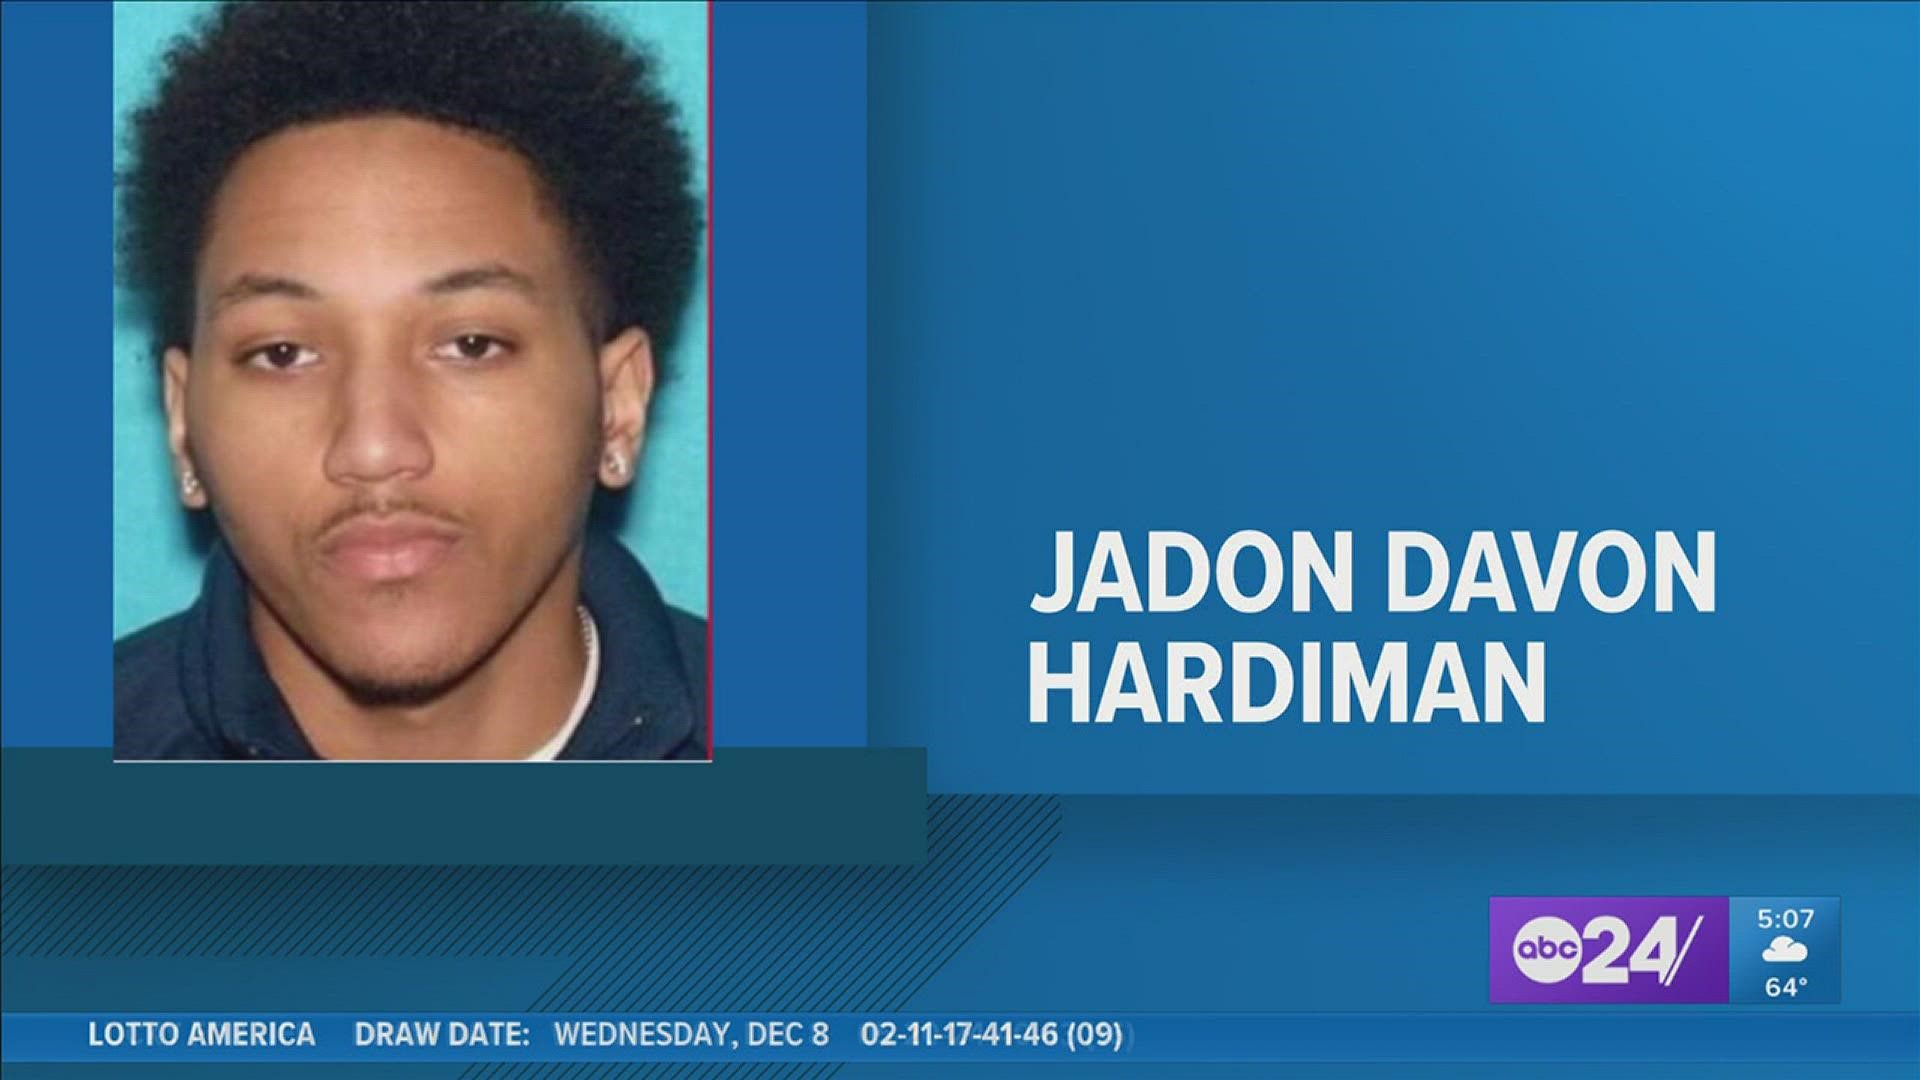 Jadon Davon Hardiman is charged with first-degree murder and more in the shooting that left Justin Pankey dead and two others injured.